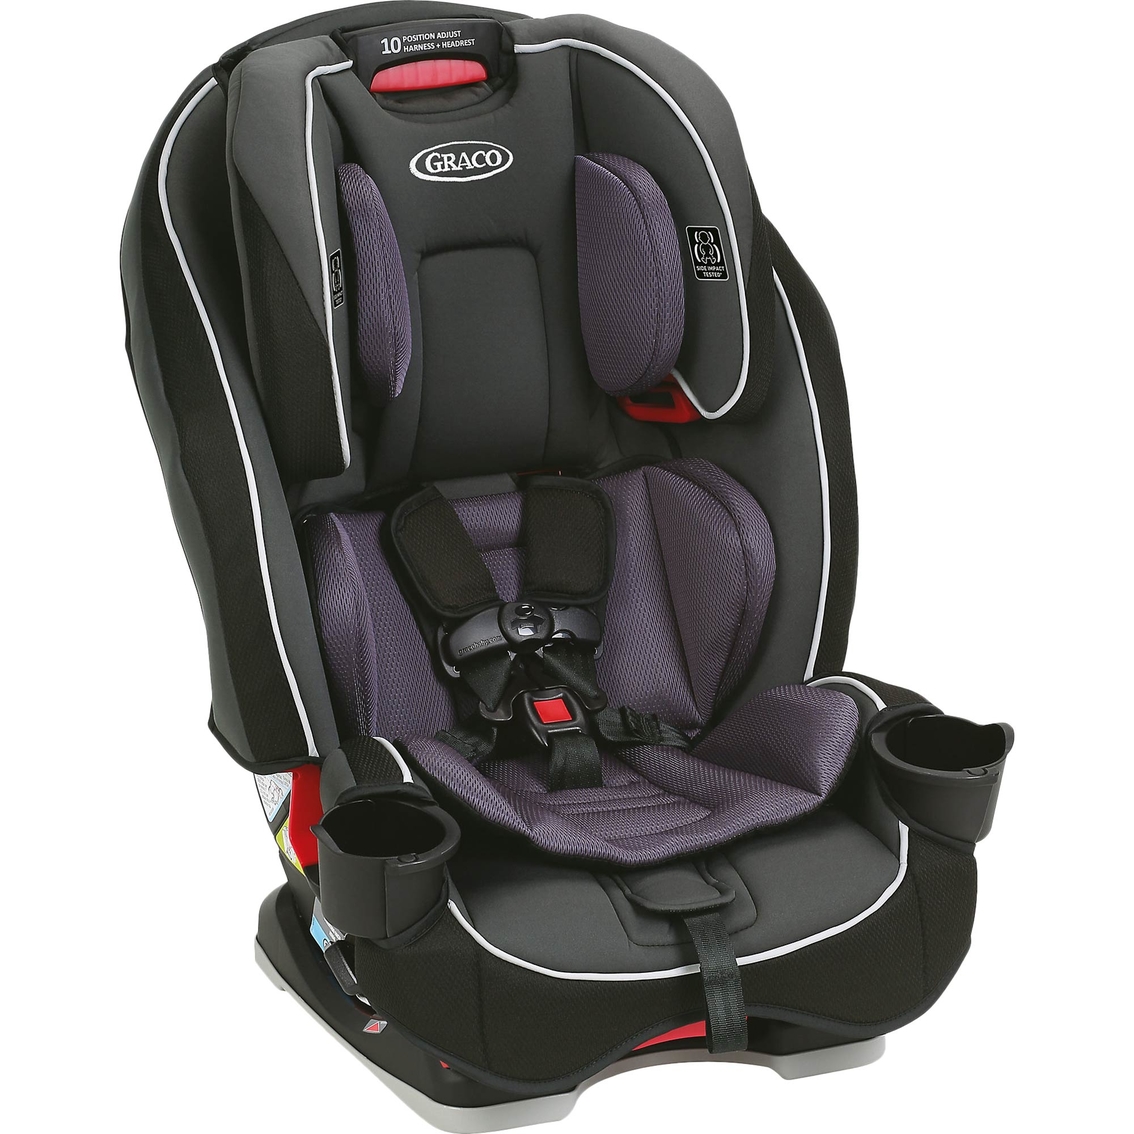 Graco SlimFit All in One Convertible Car Seat - Image 2 of 4